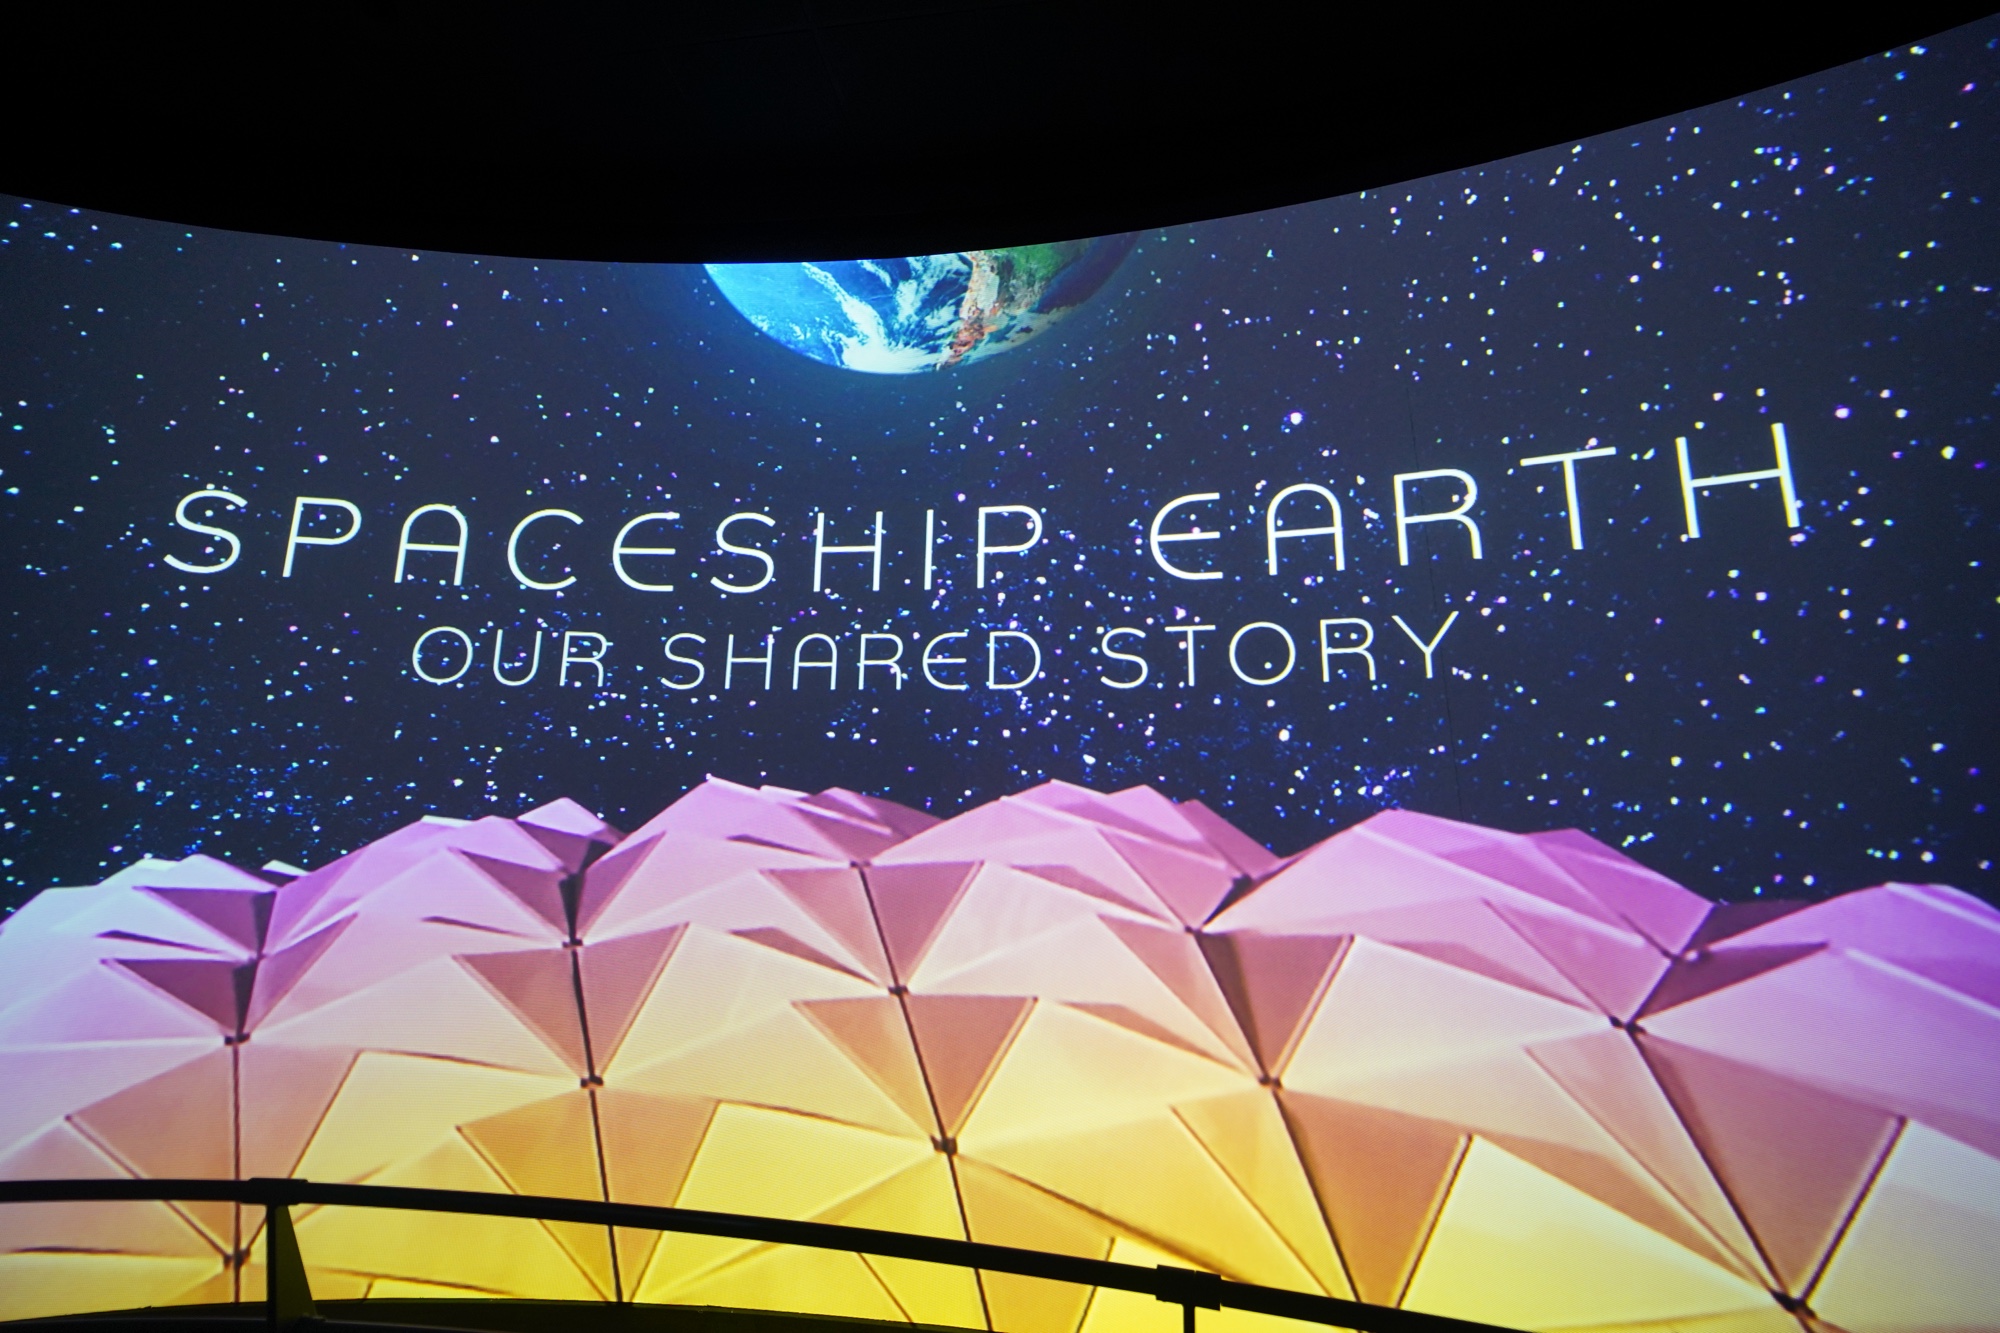 Spaceship Earth refurbishment project The EPCOT Experience